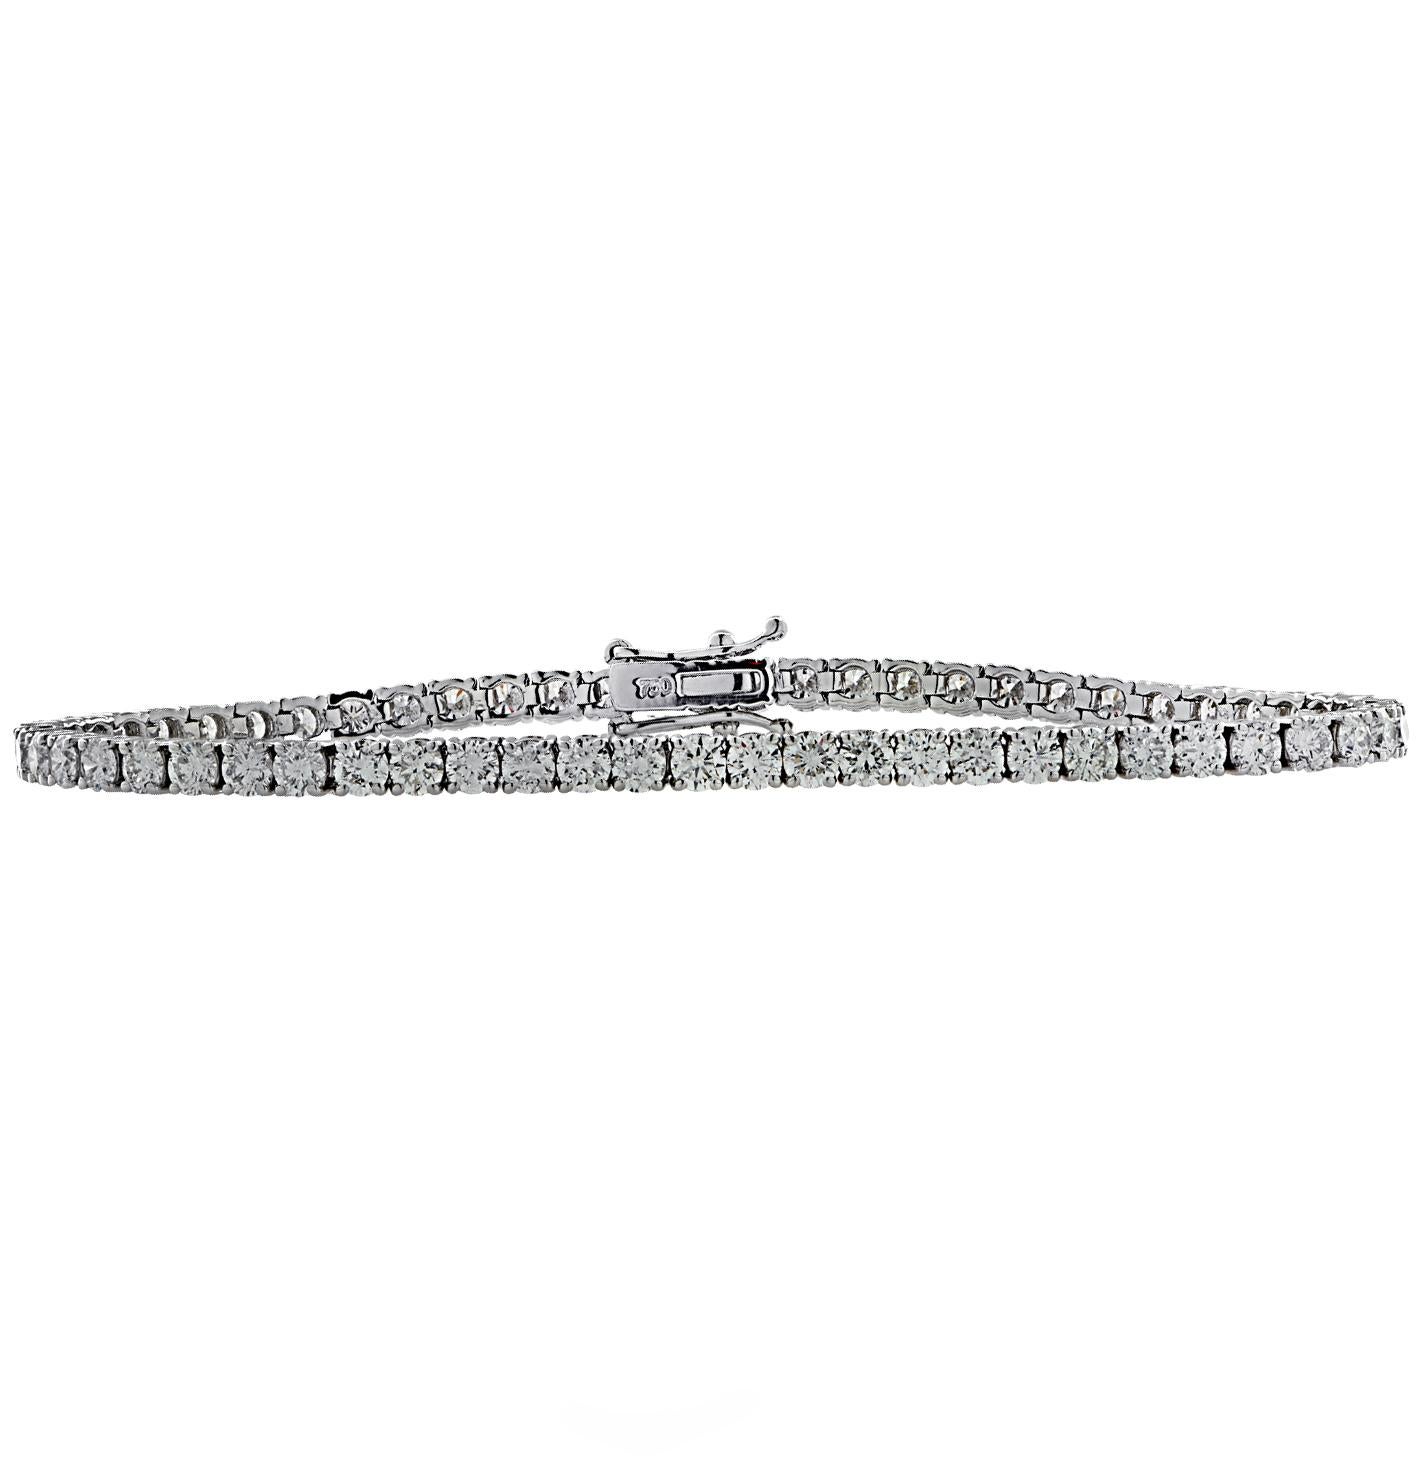 Spectacular Vivid Diamonds diamond tennis bracelet crafted in 18 karat white gold, showcasing 69 stunning round brilliant cut diamonds weighing approximately 3.08 carats total, G-H color, VS-SI clarity. Each diamond is carefully selected, perfectly